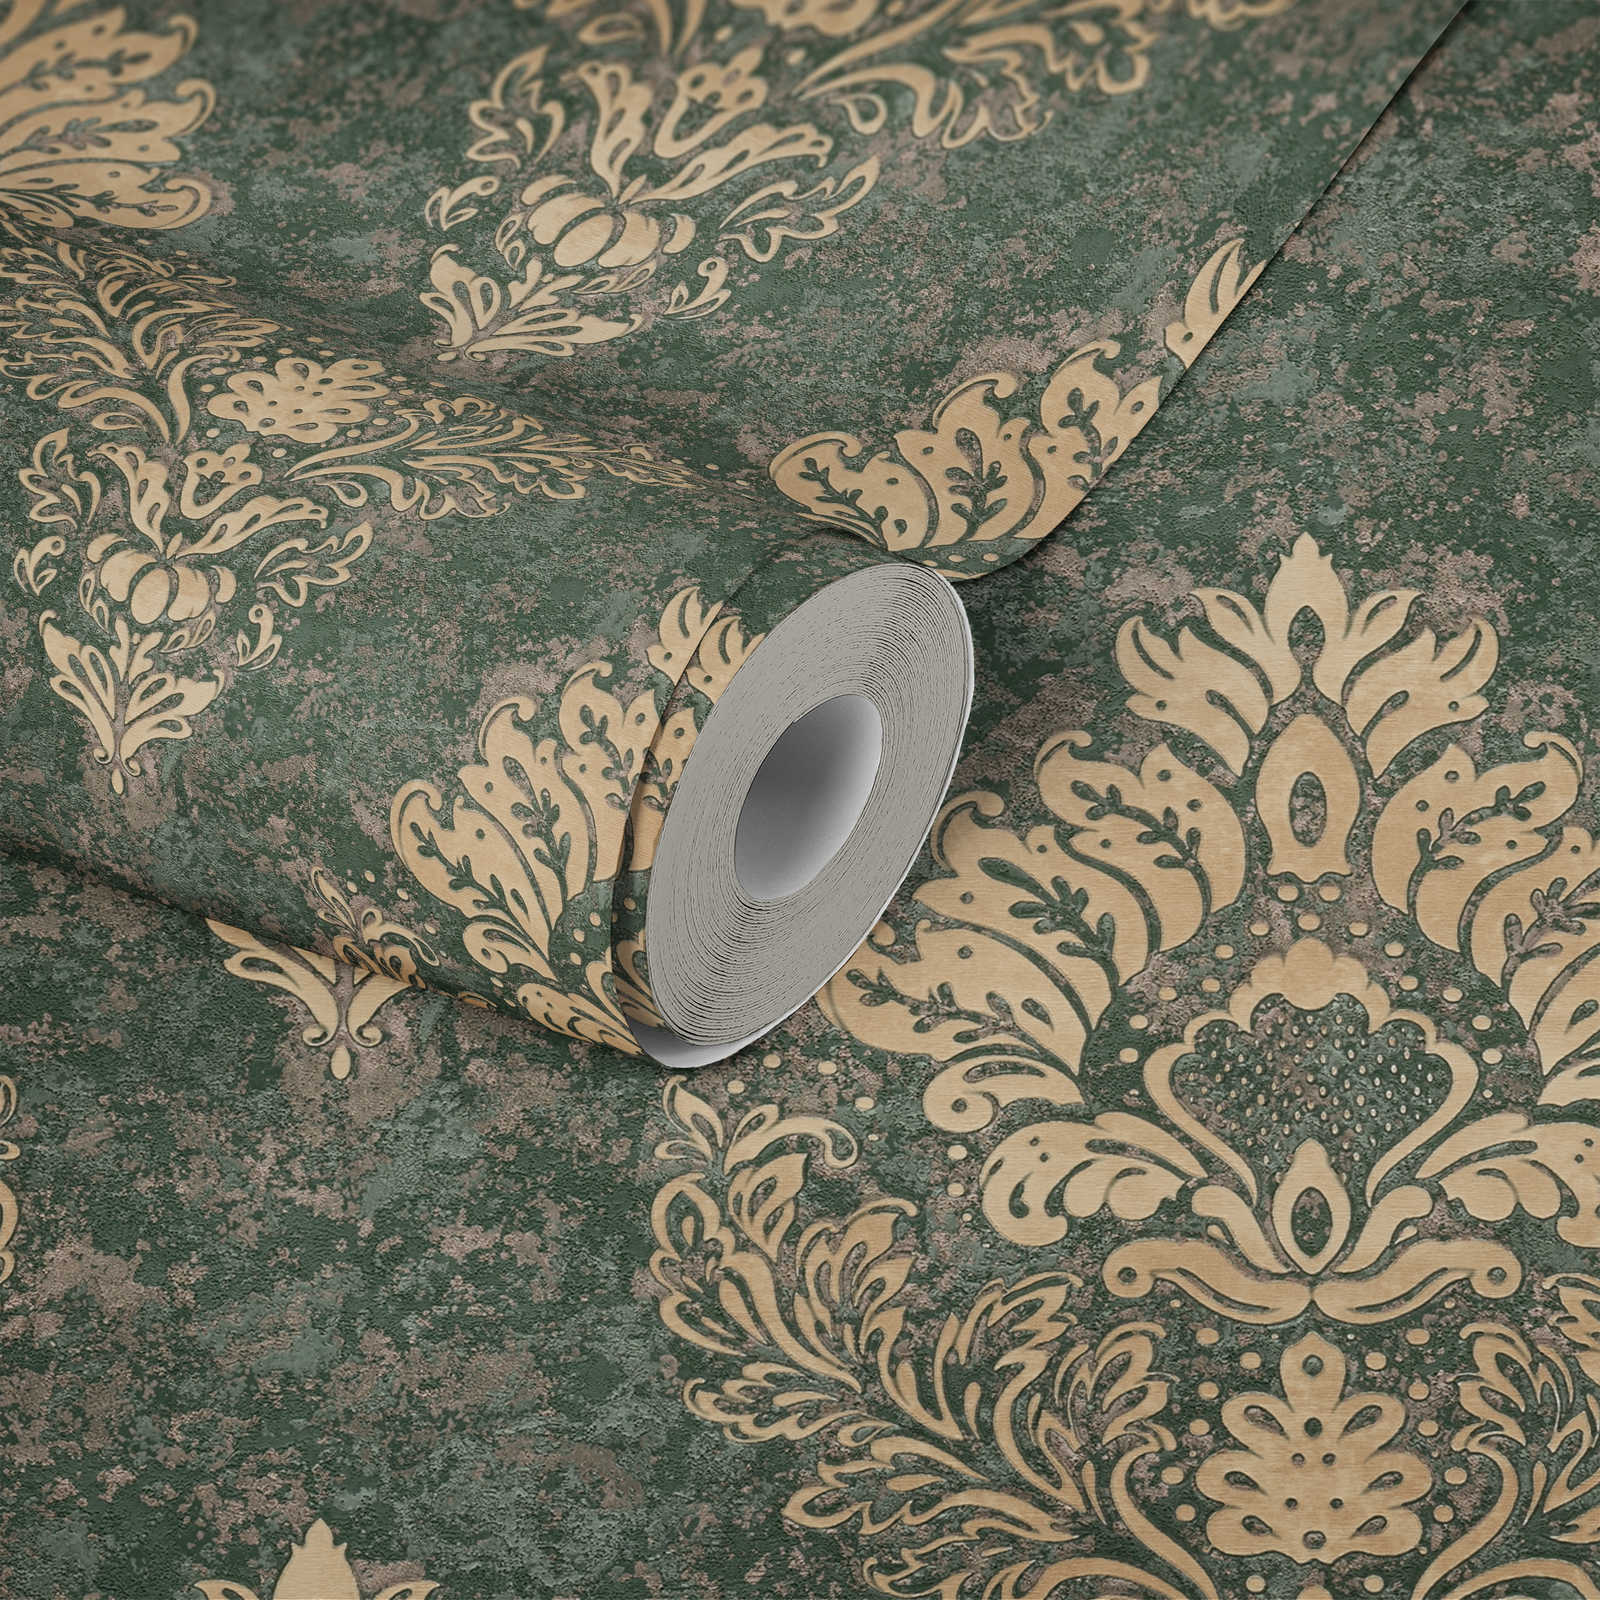             Ornamental wallpaper with floral style & gold effect - beige, brown, green
        